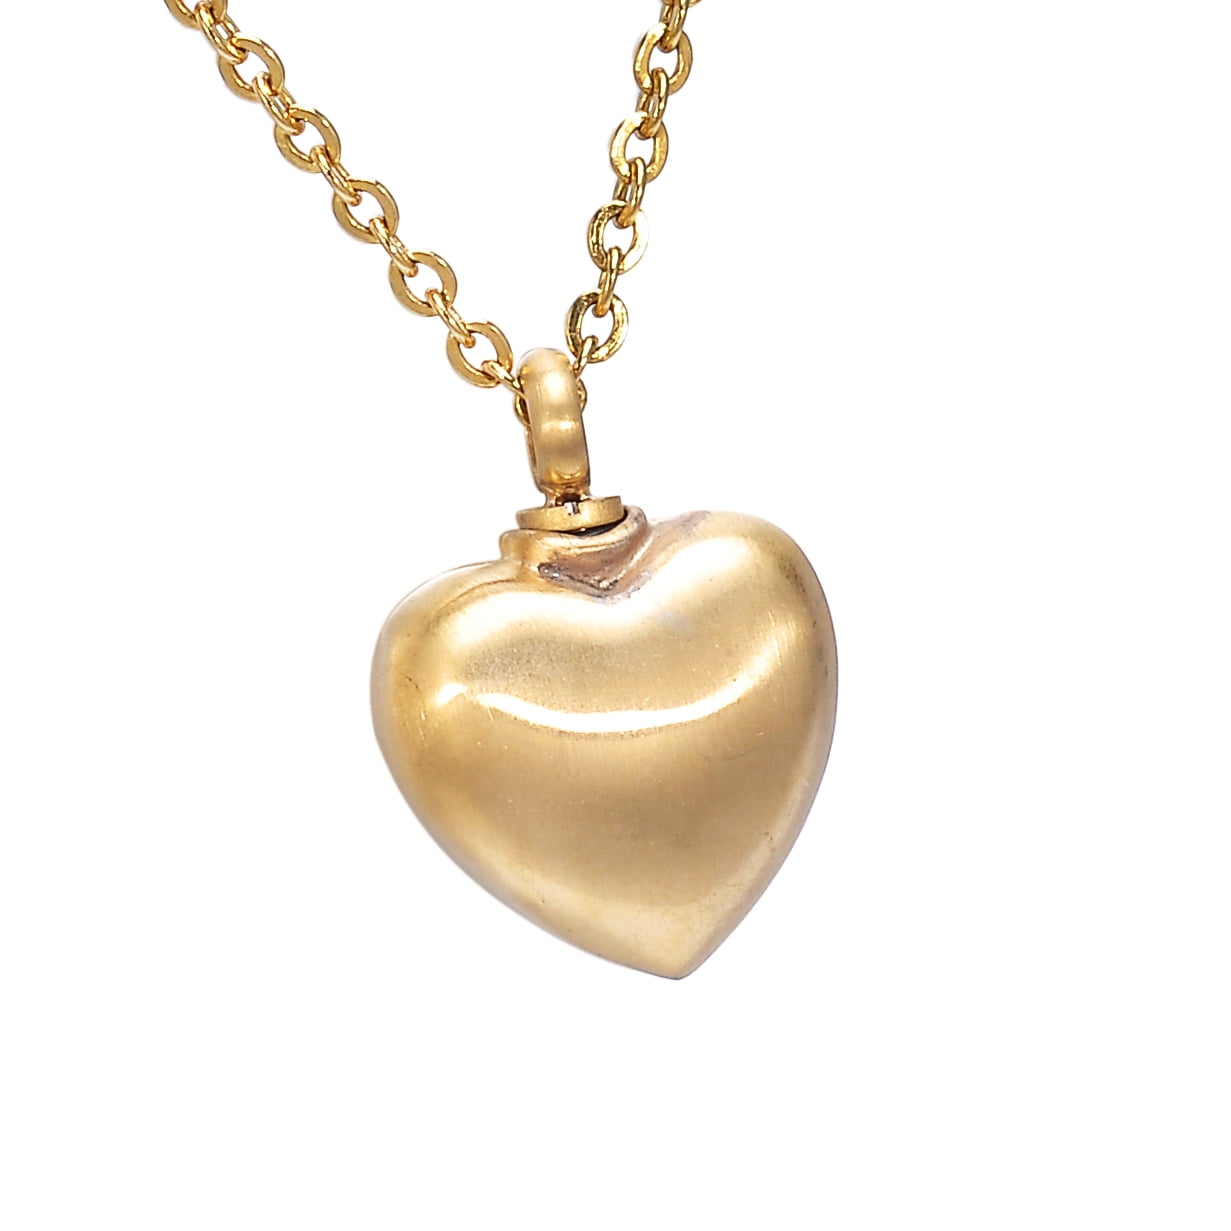 heartbeat necklace gold